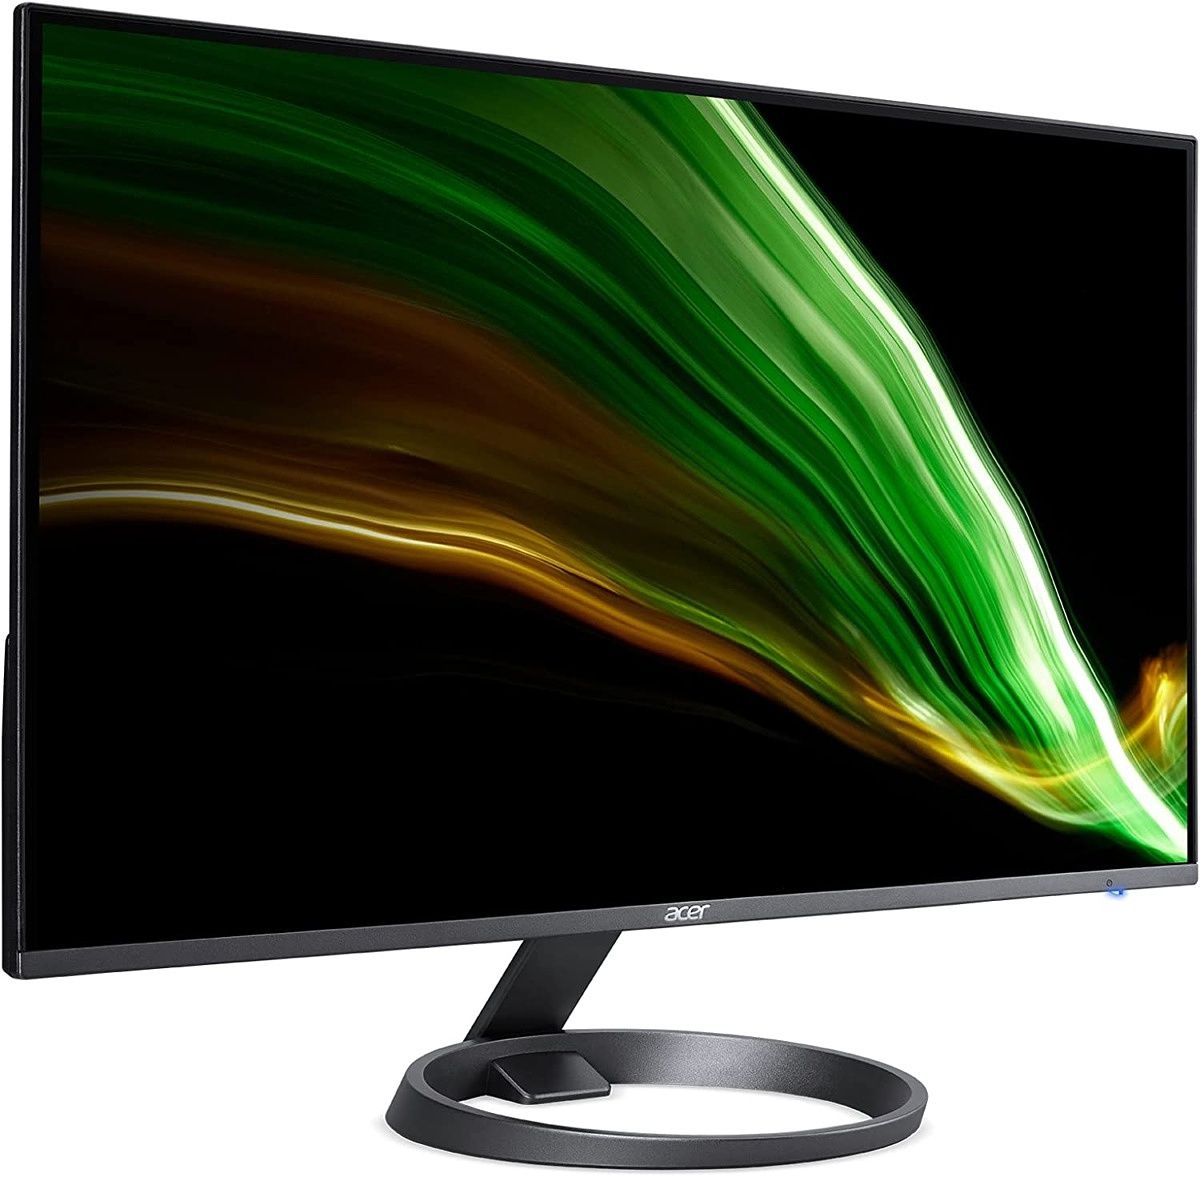 Just want a basic monitor to increase your productivity? The Acer R242Y is a very affordable choice that's bound to do the trick for you. It has Full HD resolution and a 75Hz refresh rate so it feels a little smoother to use, plus it has very thin bezels so no space is wasted.